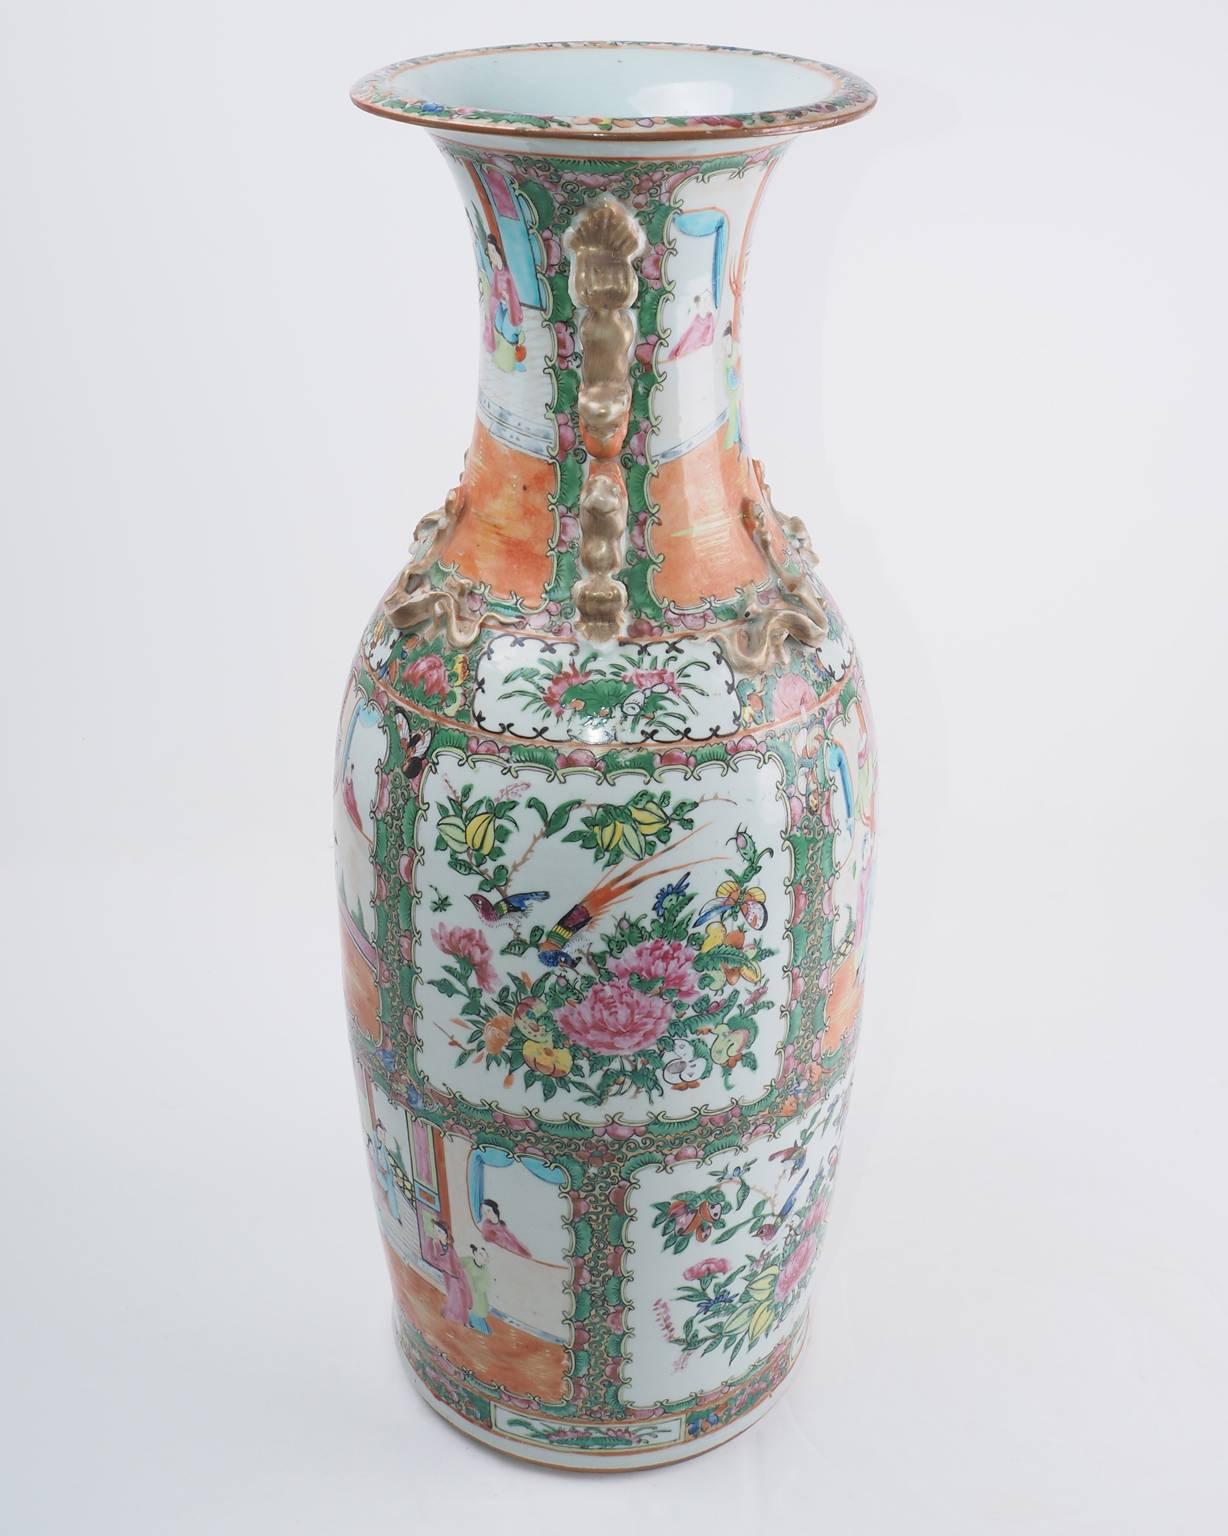 A pair of Cantonese export polychrome enameled porcelain vases, circa 1870.